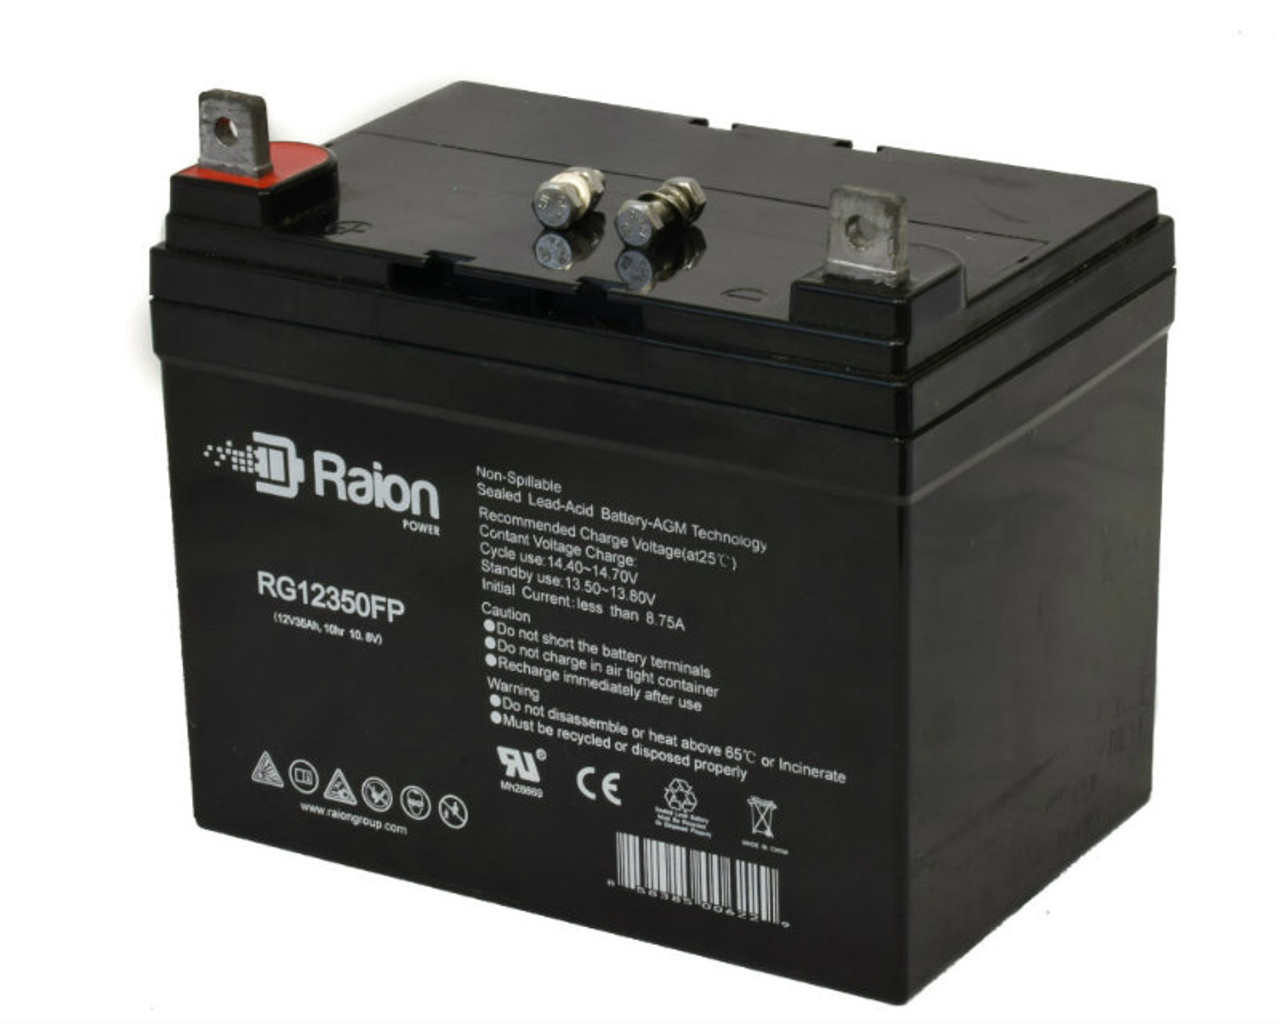 Raion Power Replacement 12V 35Ah Battery for Double Tech DB12-33 - 1 Pack